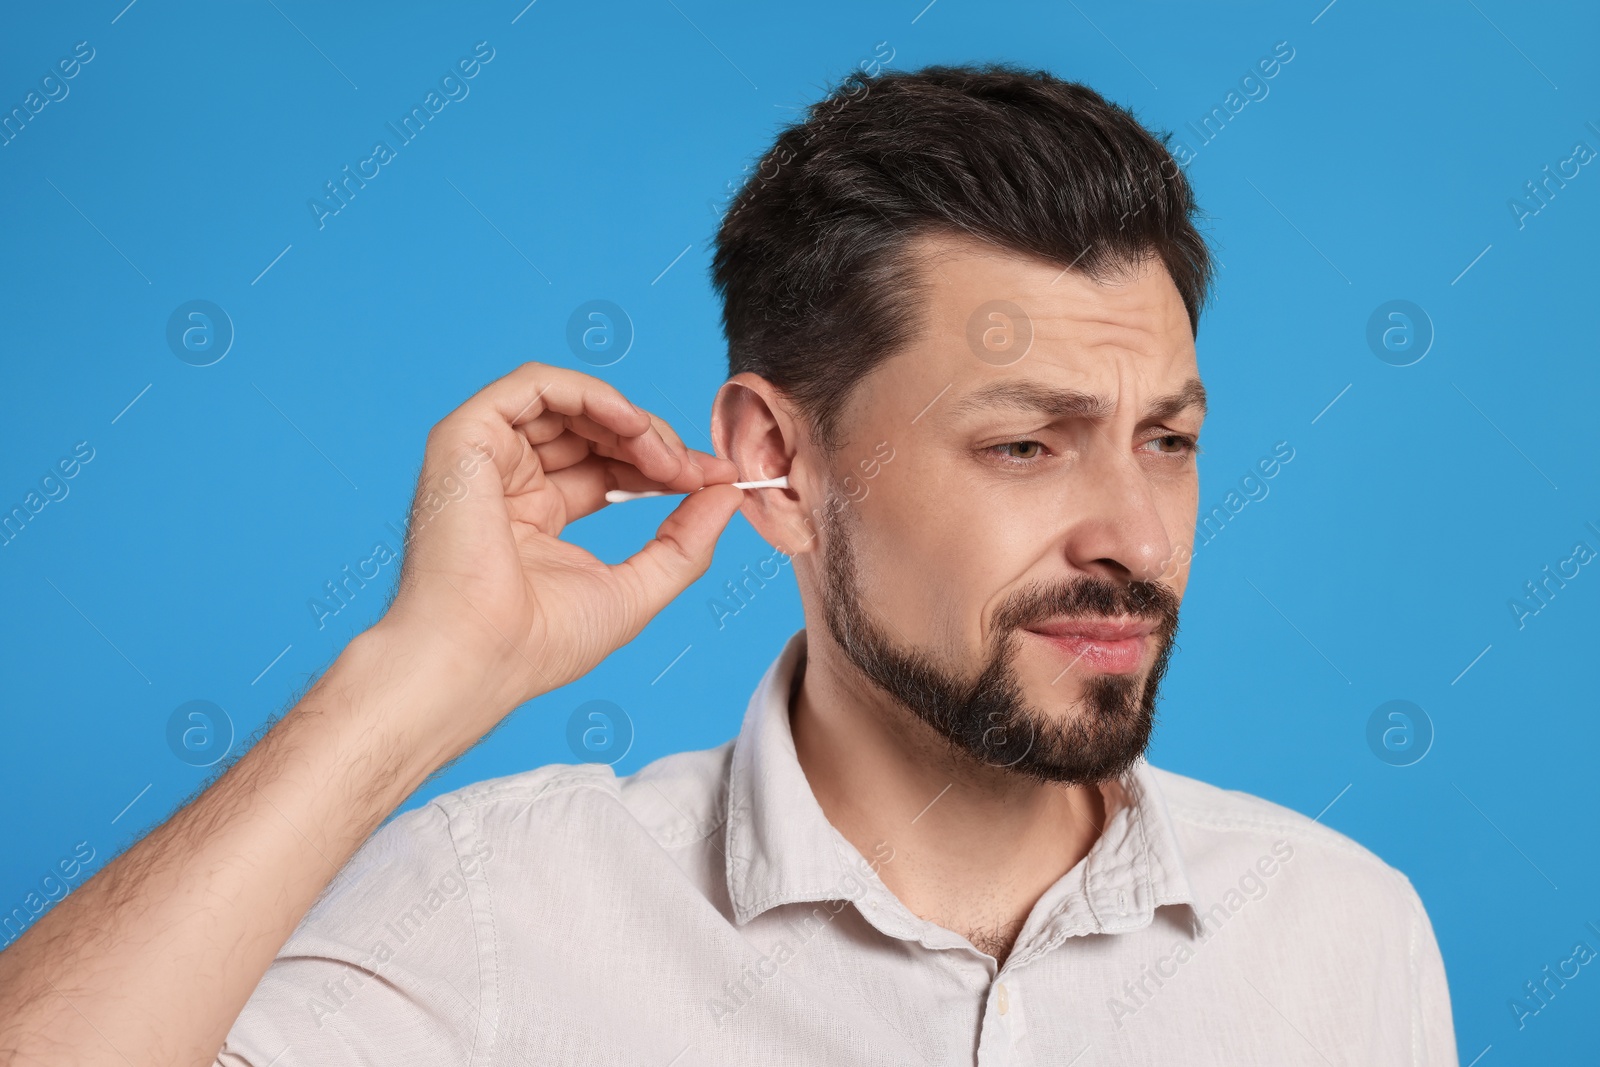 Photo of Emotional man cleaning ears on light blue background